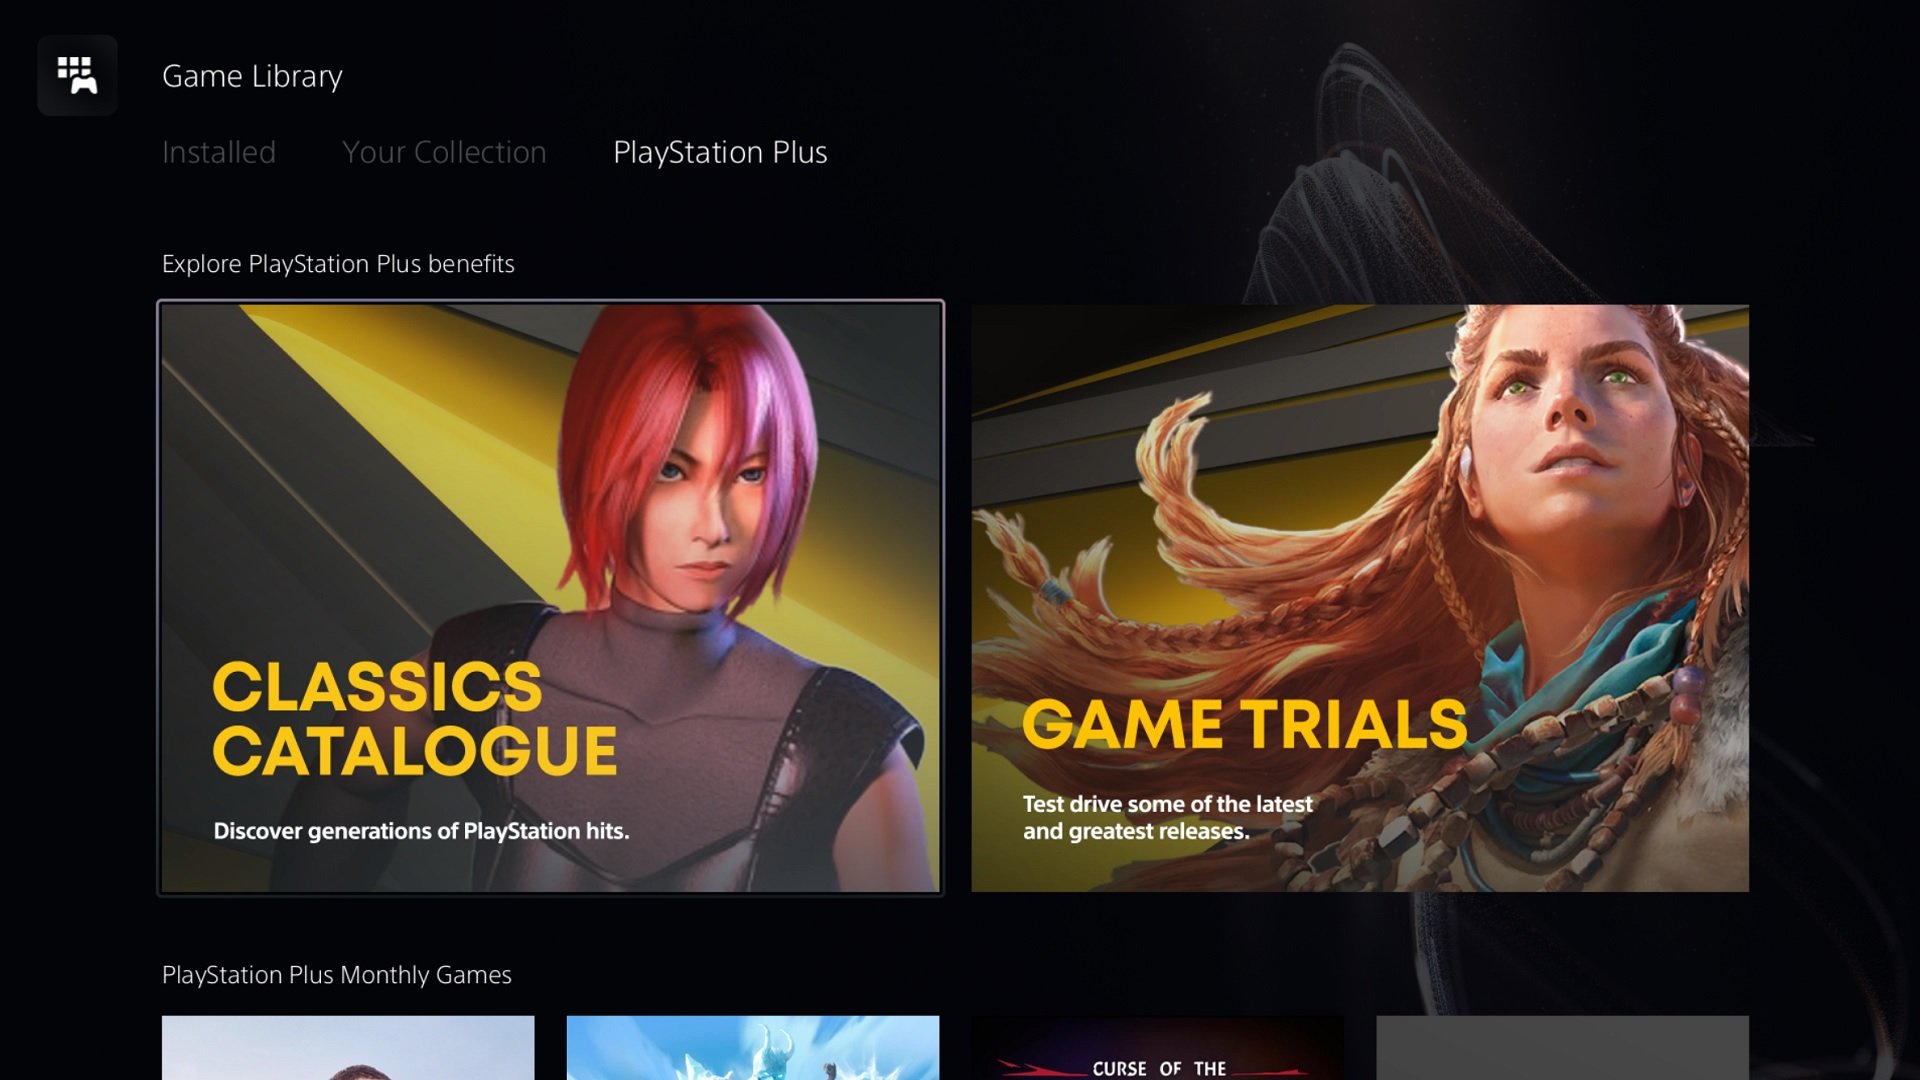 Dino Crisis coming to PlayStation Plus Classics Catalog, PlayStation Store  banner suggests - Gematsu